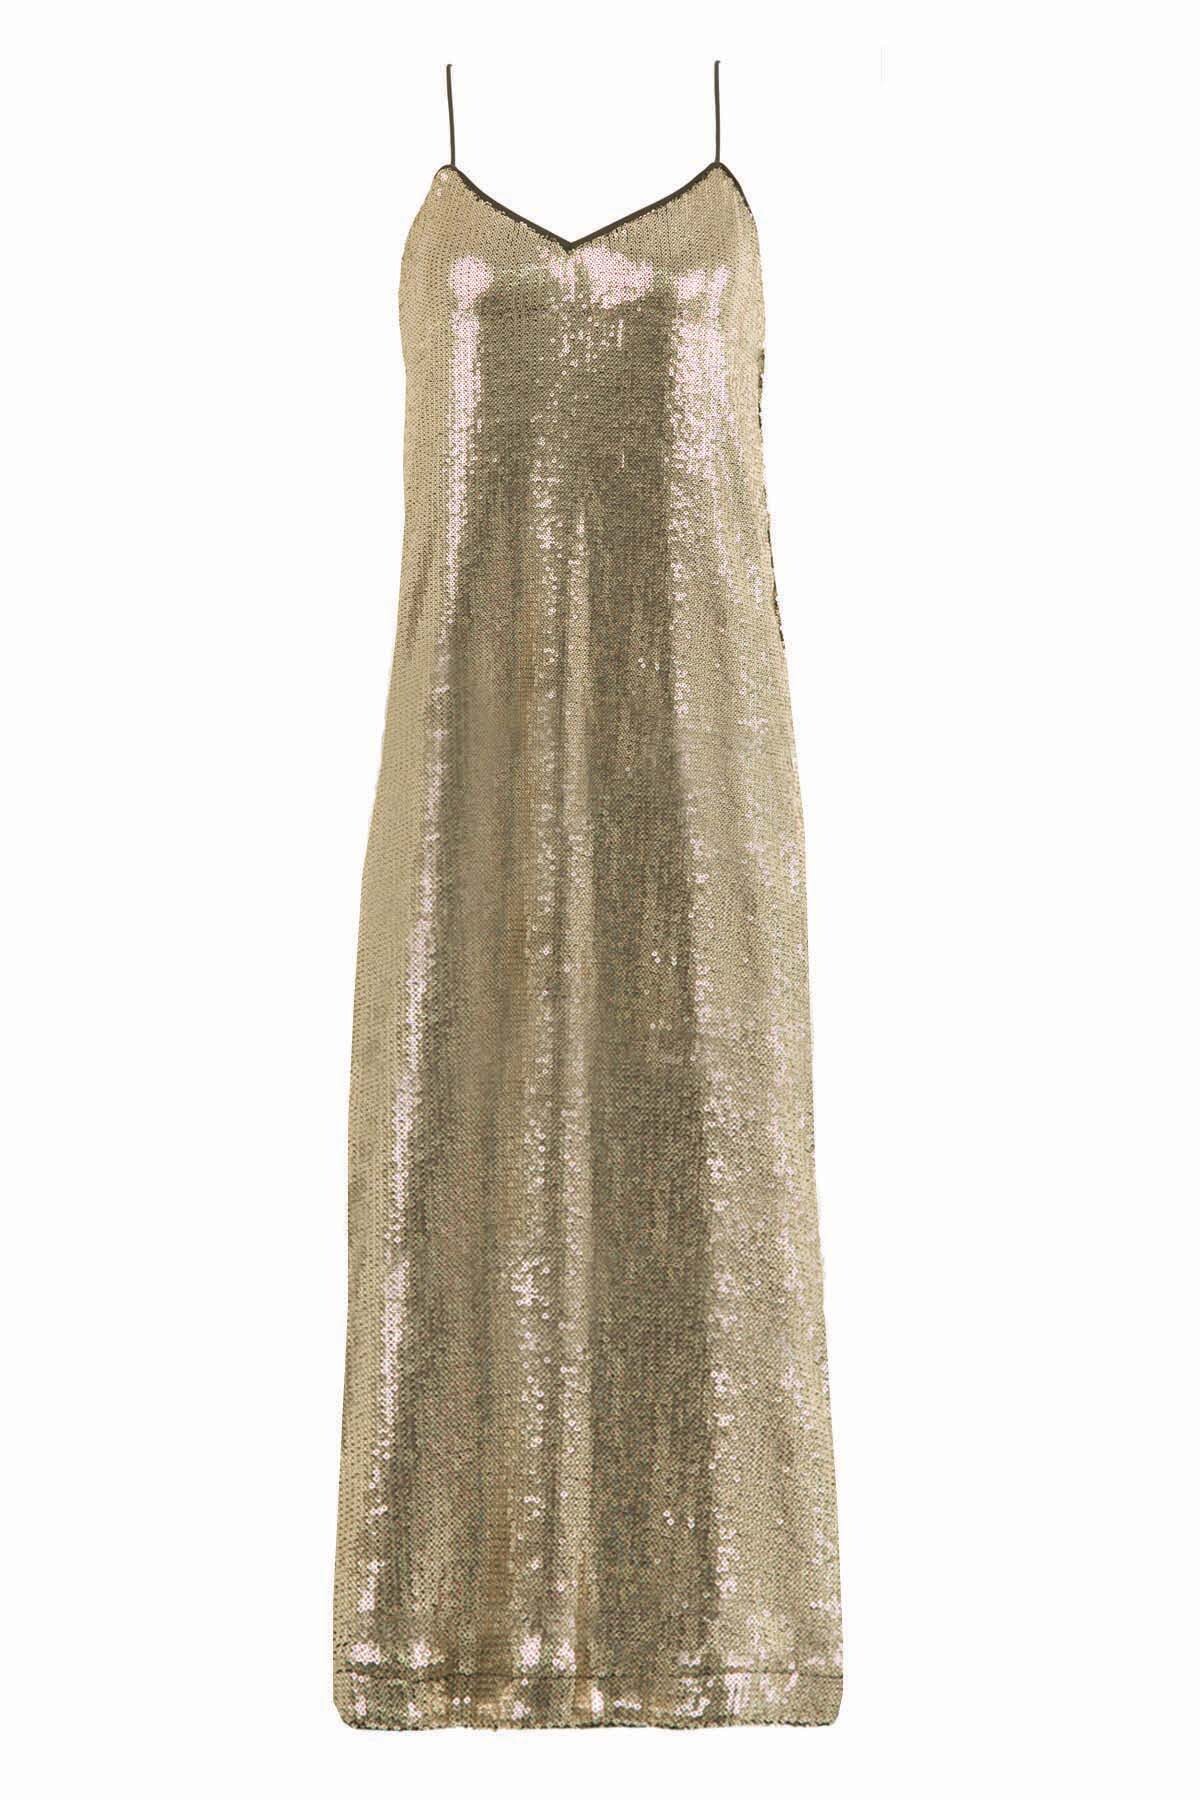 GOLD SEQUIN BOMB DRESS- COOPER SUMMER 18 Boxing Day Sale